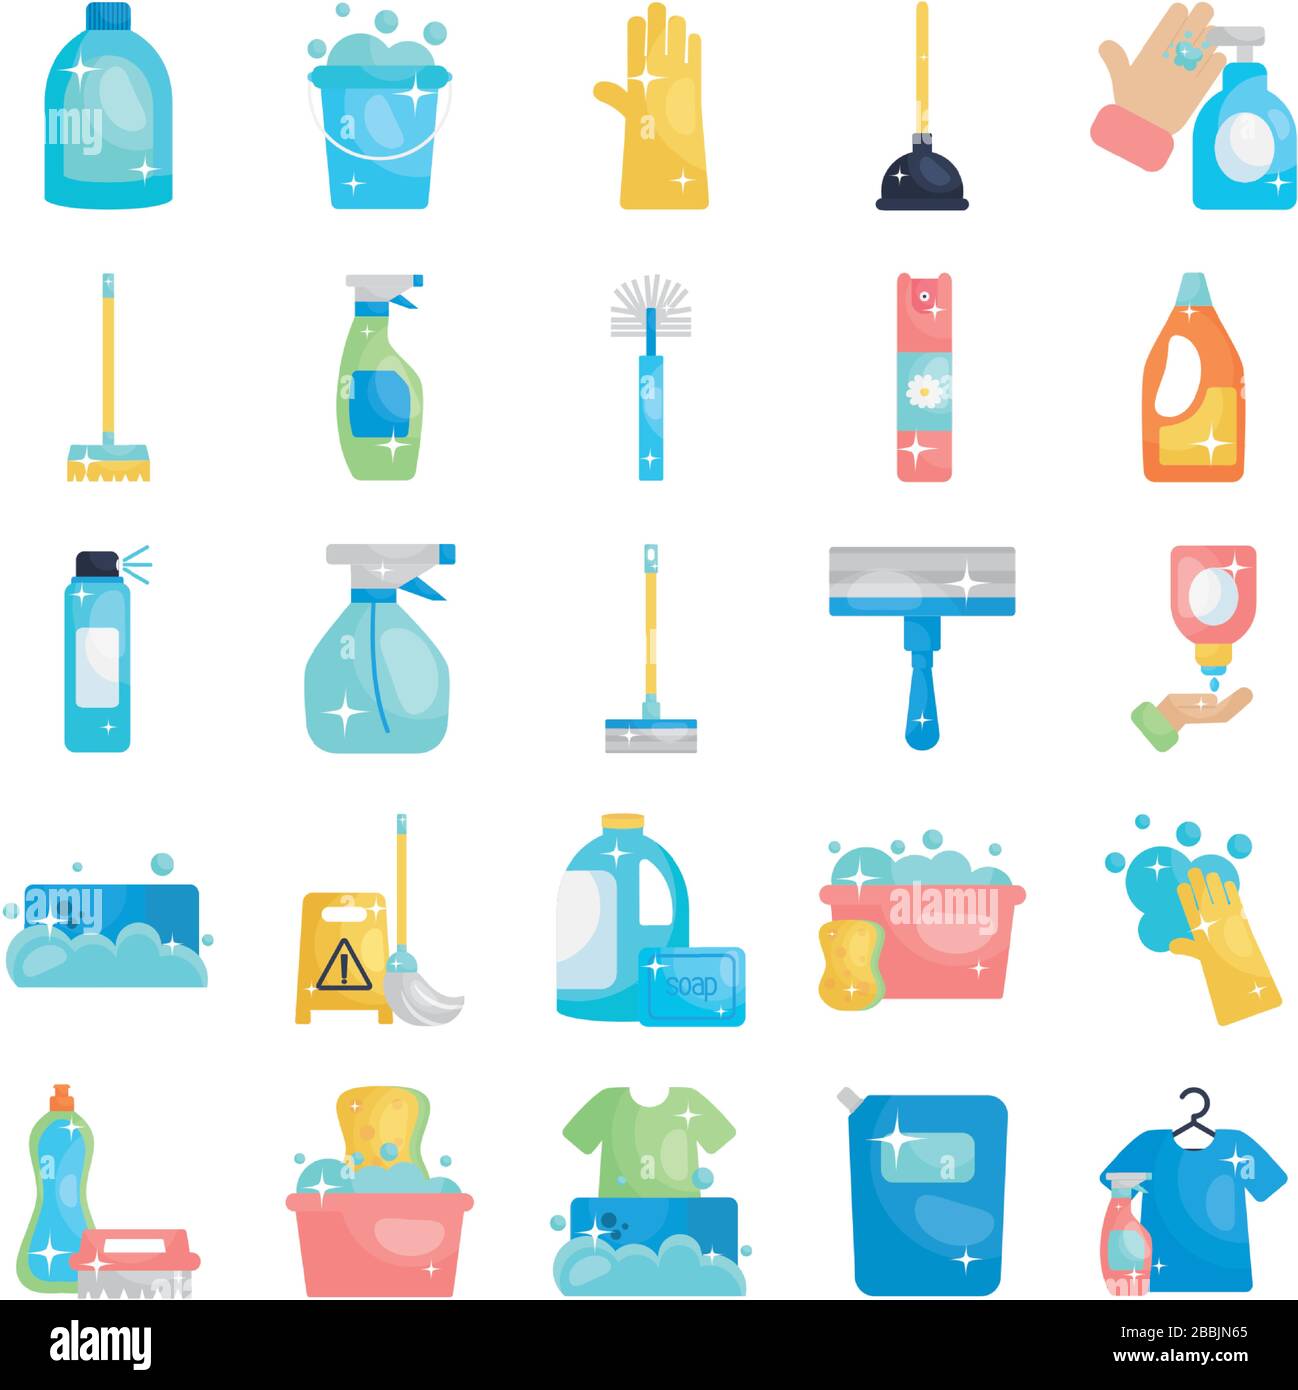 https://c8.alamy.com/comp/2BBJN65/cleaning-products-and-tools-icon-set-over-white-background-flat-style-vector-illustration-2BBJN65.jpg